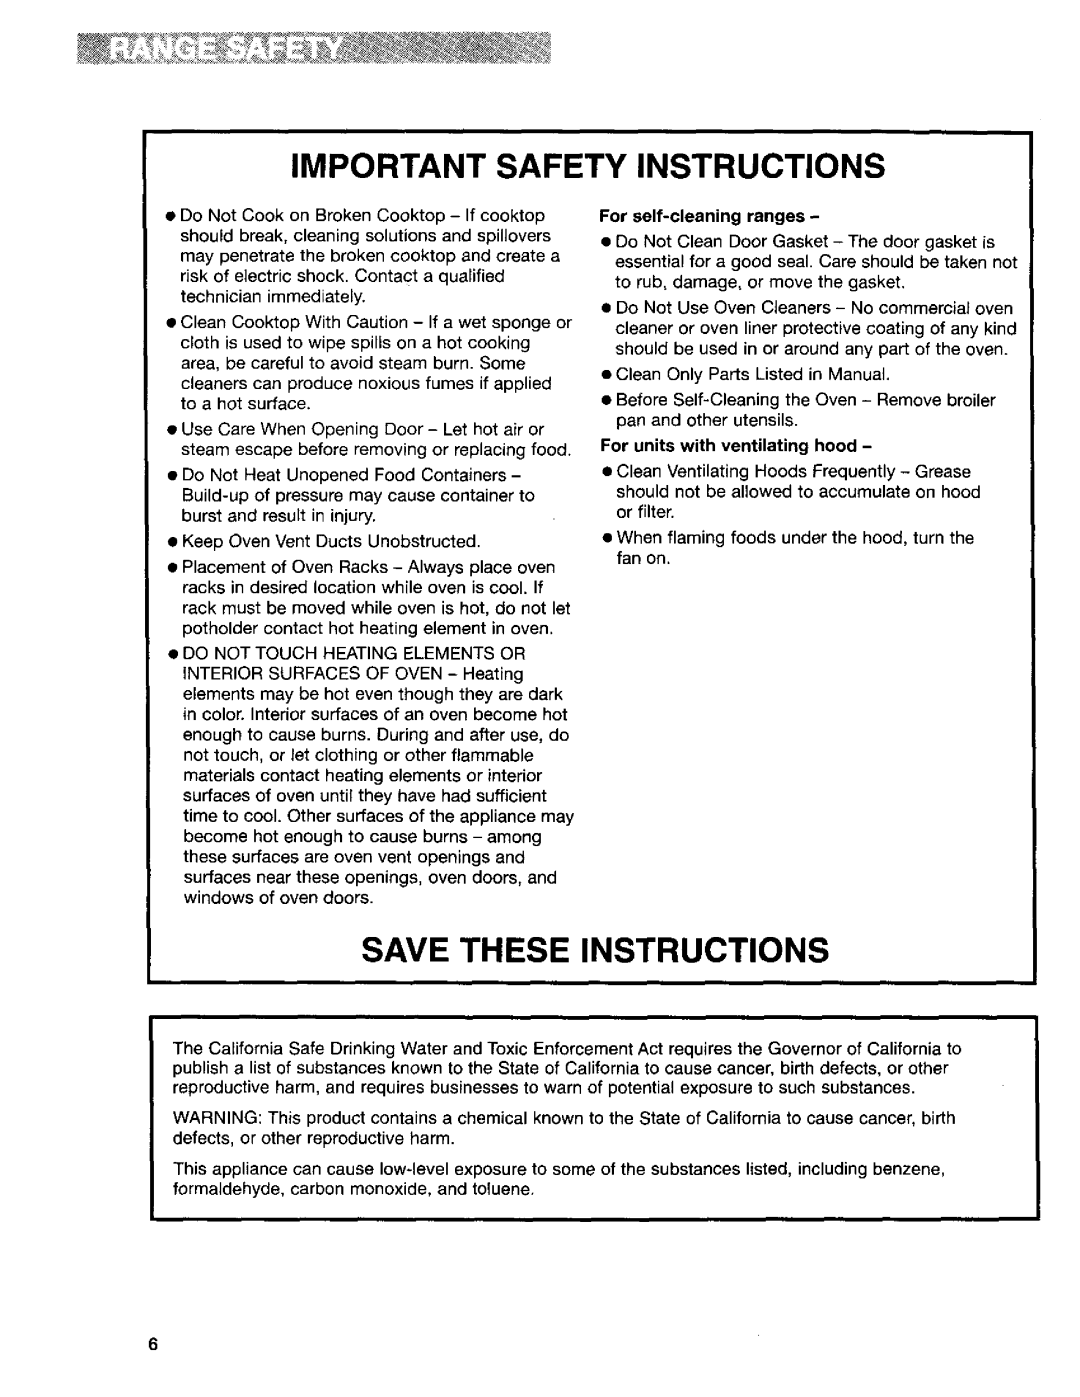 Kenmore 665.95822, 665.95824, 665.95829 Important Safety Instructions, Save These Instructions, For self-cleaningranges 